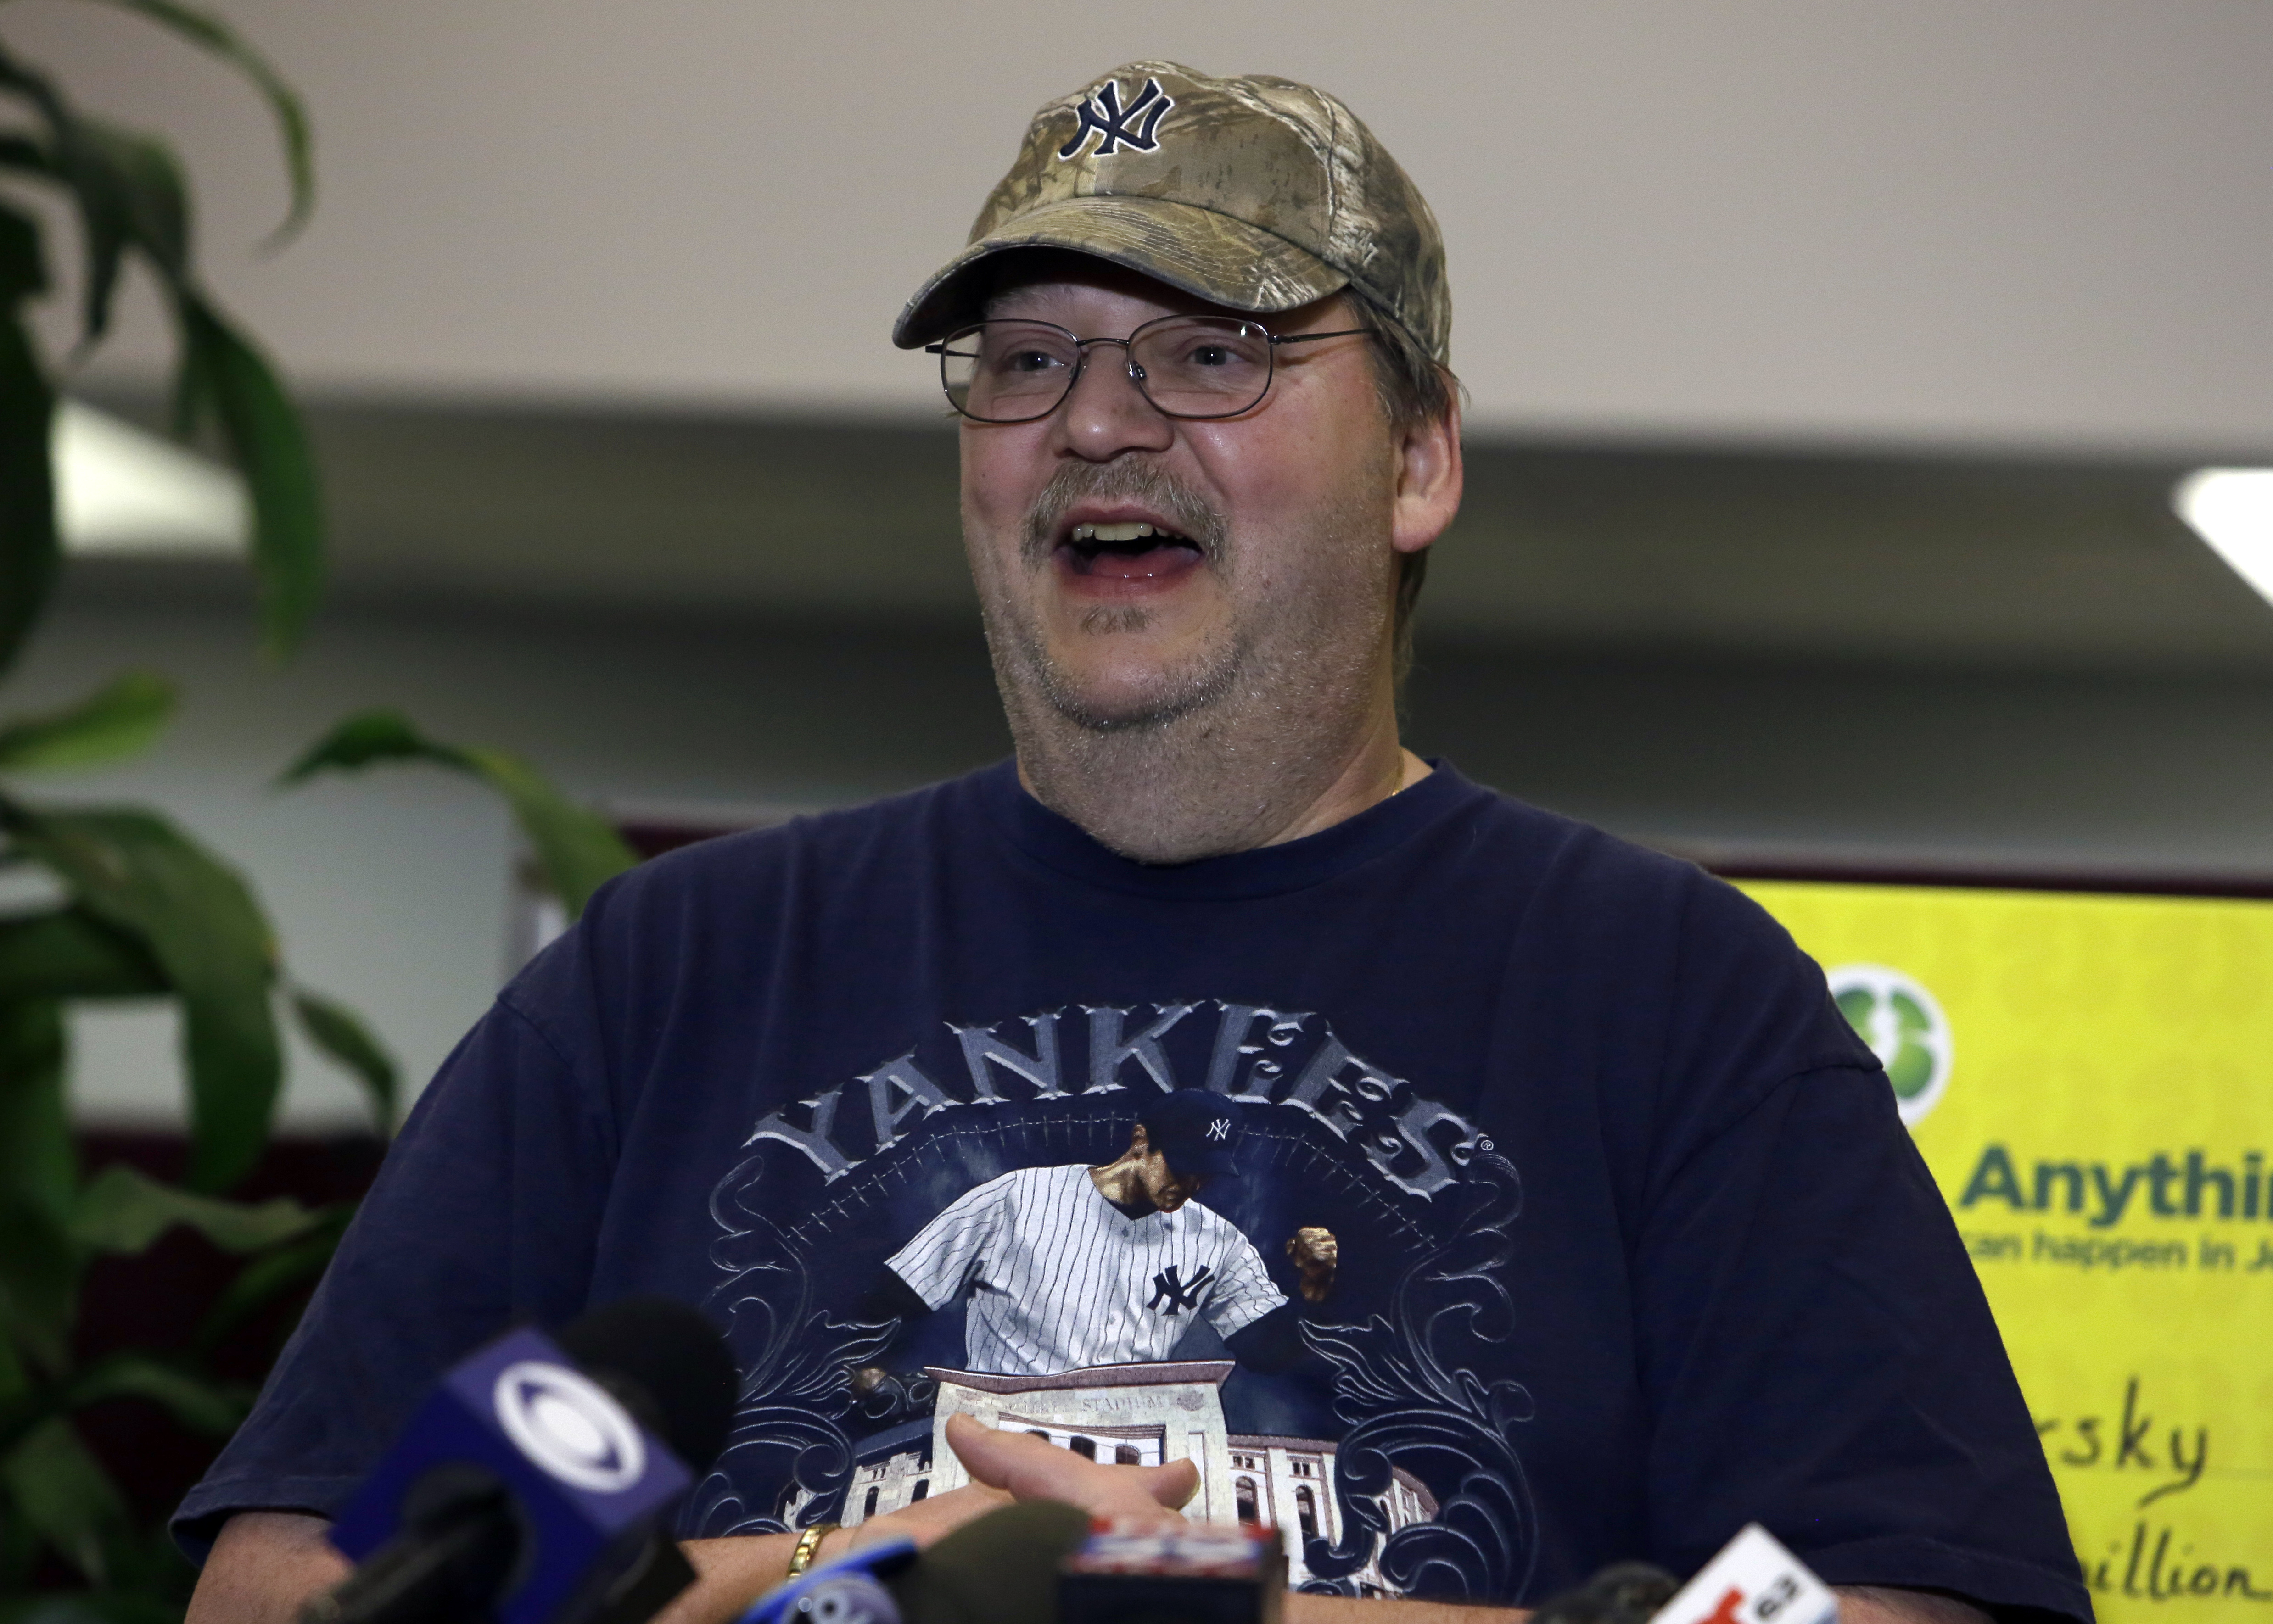 This Unemployed Man Won the $273M Mega Millions Jackpot — But Only Because of a Good Samaritan